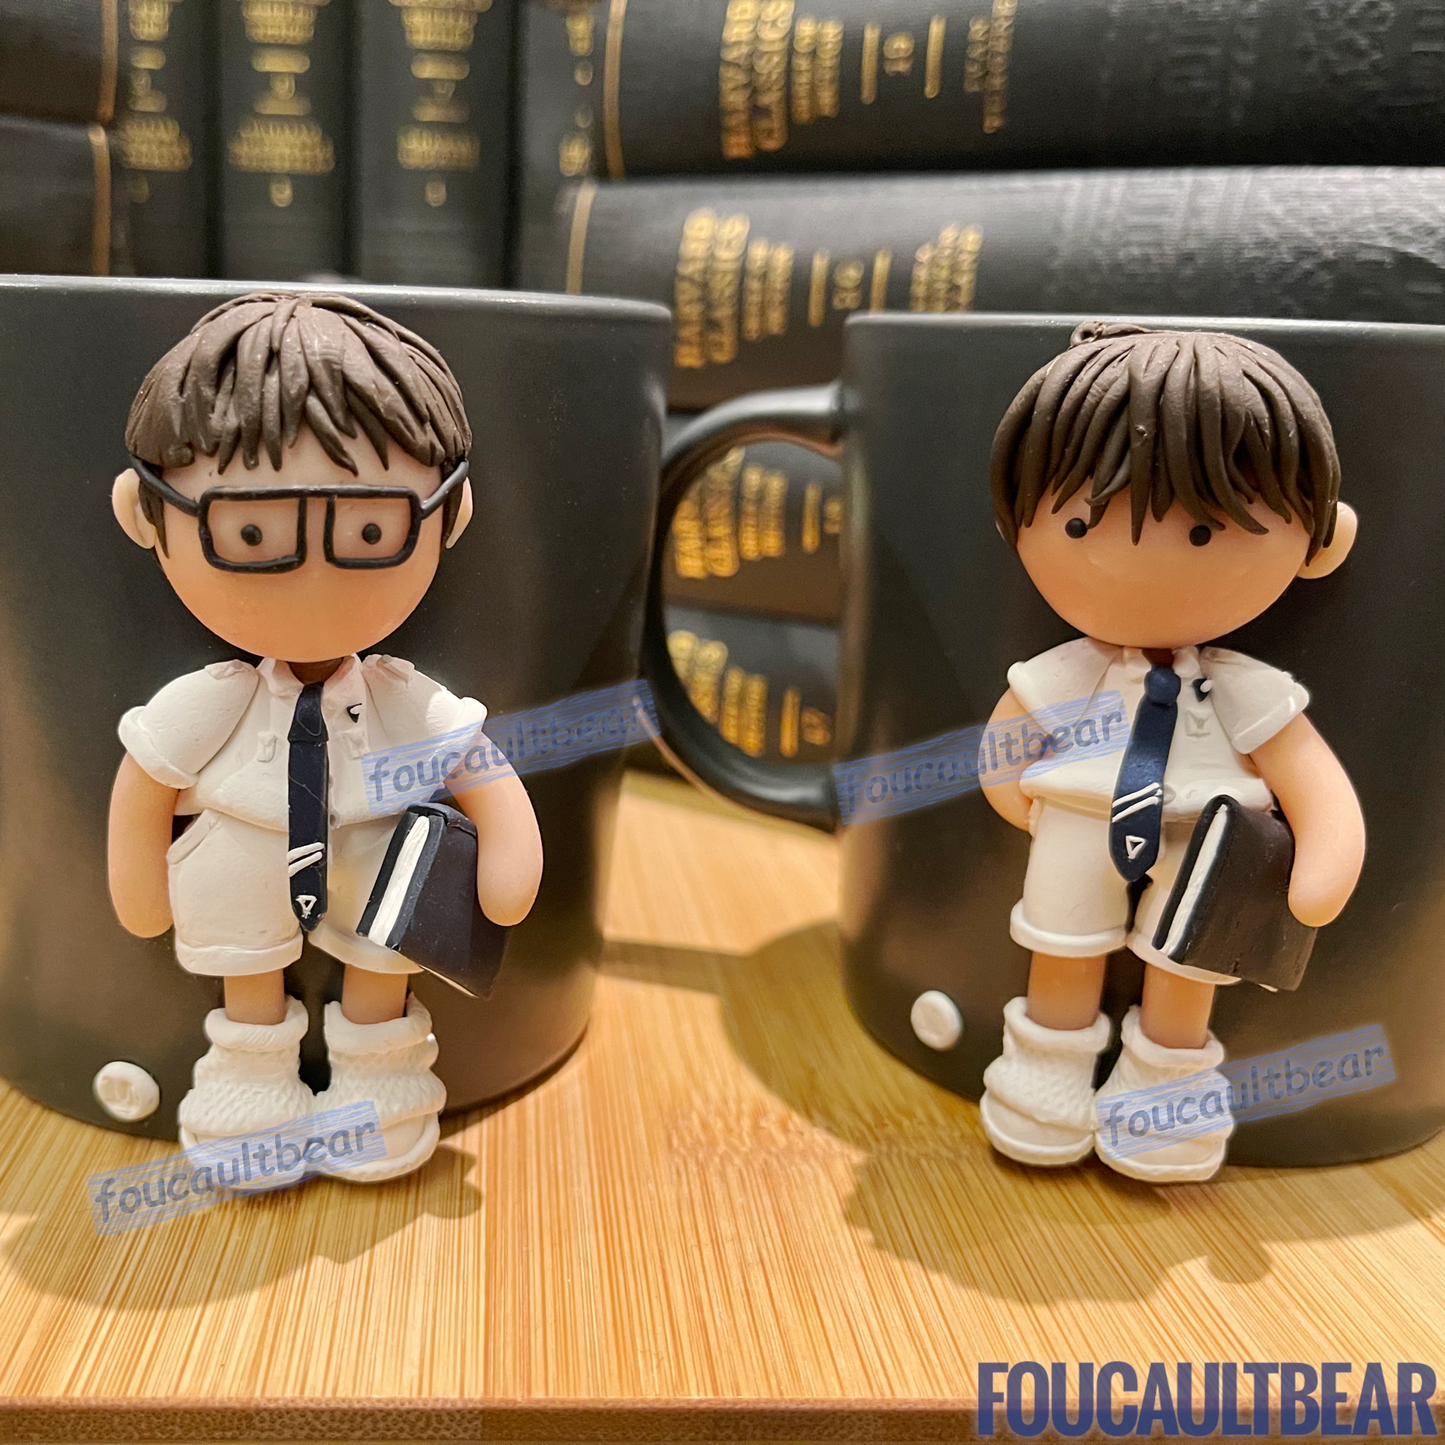 I'm very excited to debut my handcrafted "School Series" polymer clay figurine on mugs. Introducing for the first time, Caden, of the Chloe and Caden series. Every Chloe and Caden figurine is handcrafted with lots of thought and care. They make great storage for pens, pencils, small rulers, etc....